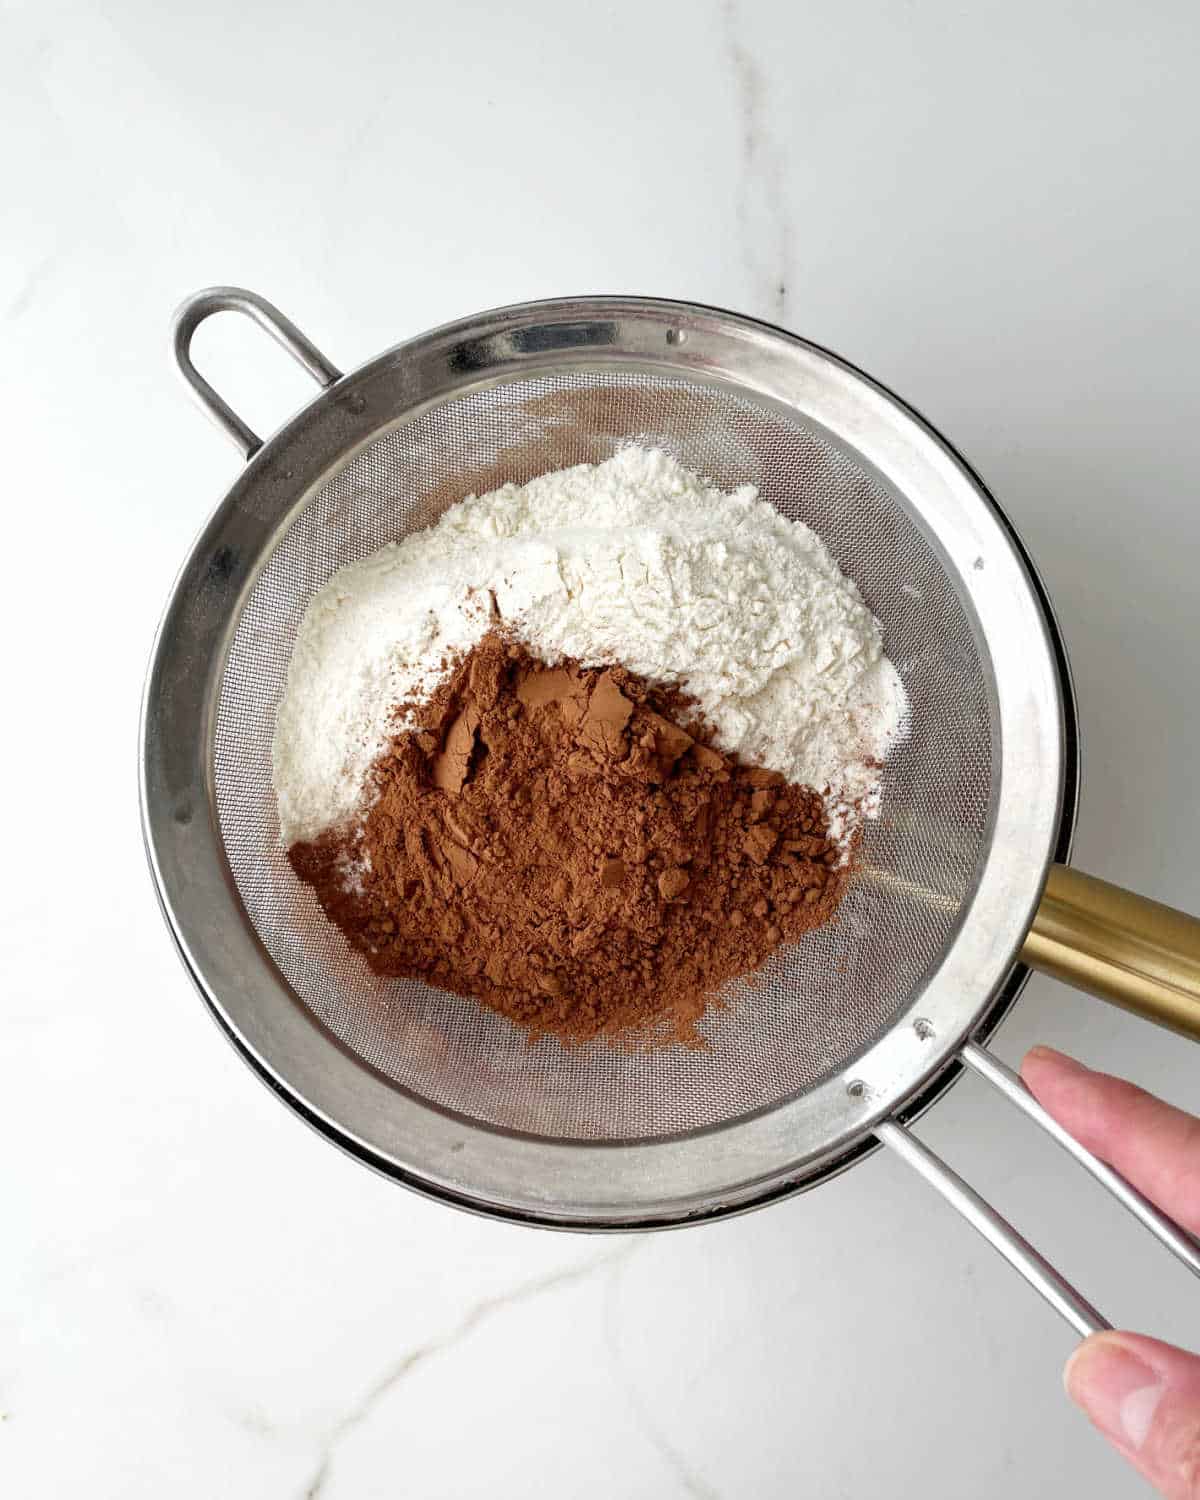 Sifting flour and cocoa powder over a glass bowl. White marble surface.